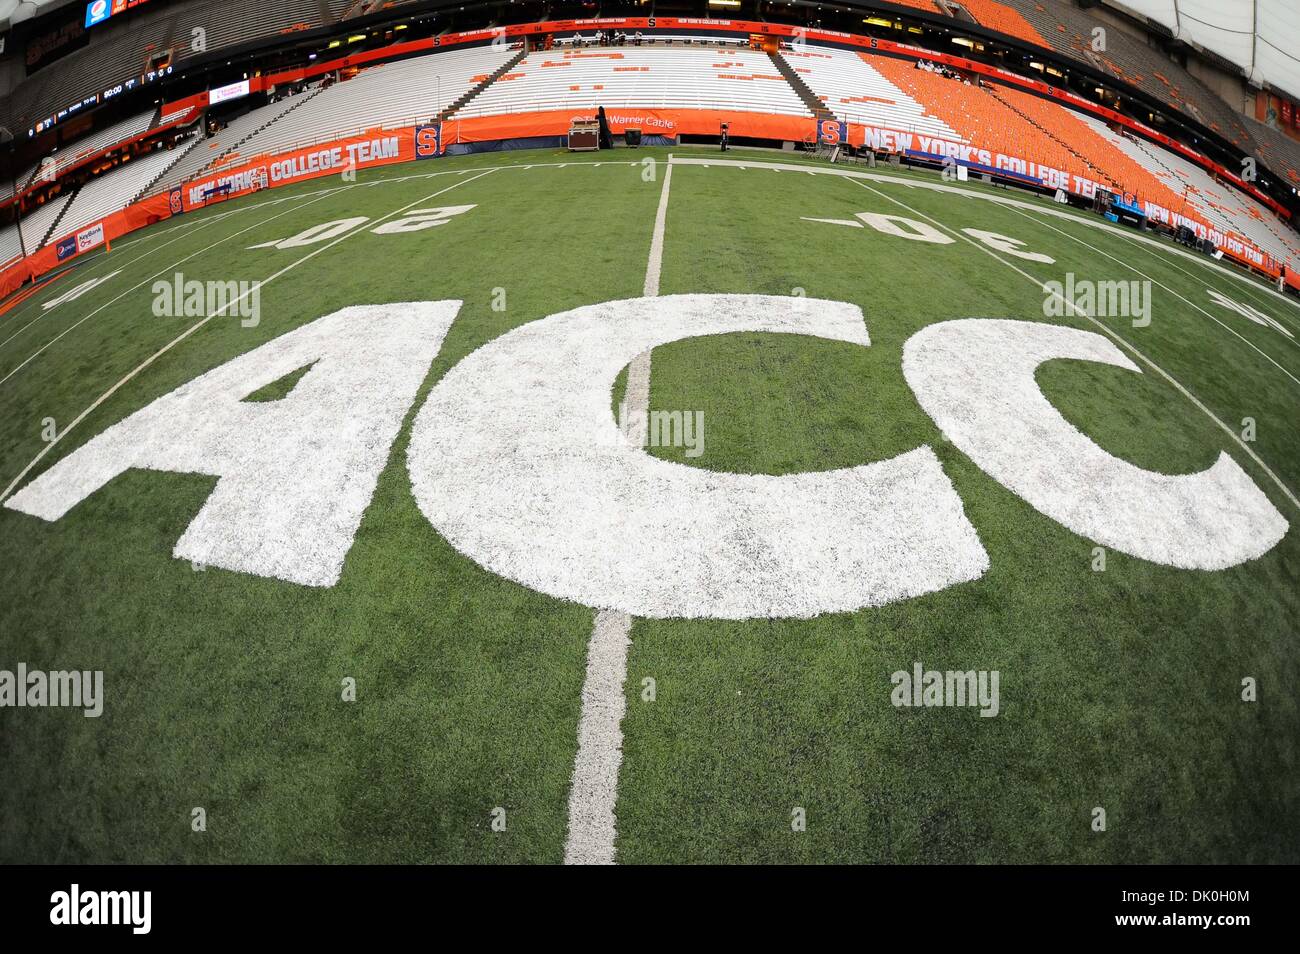 Syracuse, New York, USA. 30th Nov, 2013. November 30, 2013: General view of the Atlantic Coast Conference logo at the Carrier Dome prior to an NCAA Football game between the Boston College Eagles and the Syracuse Orange in Syracuse, New York. Syracuse defeated Boston College 34-31. Rich Barnes/CSM/Alamy Live News Stock Photo